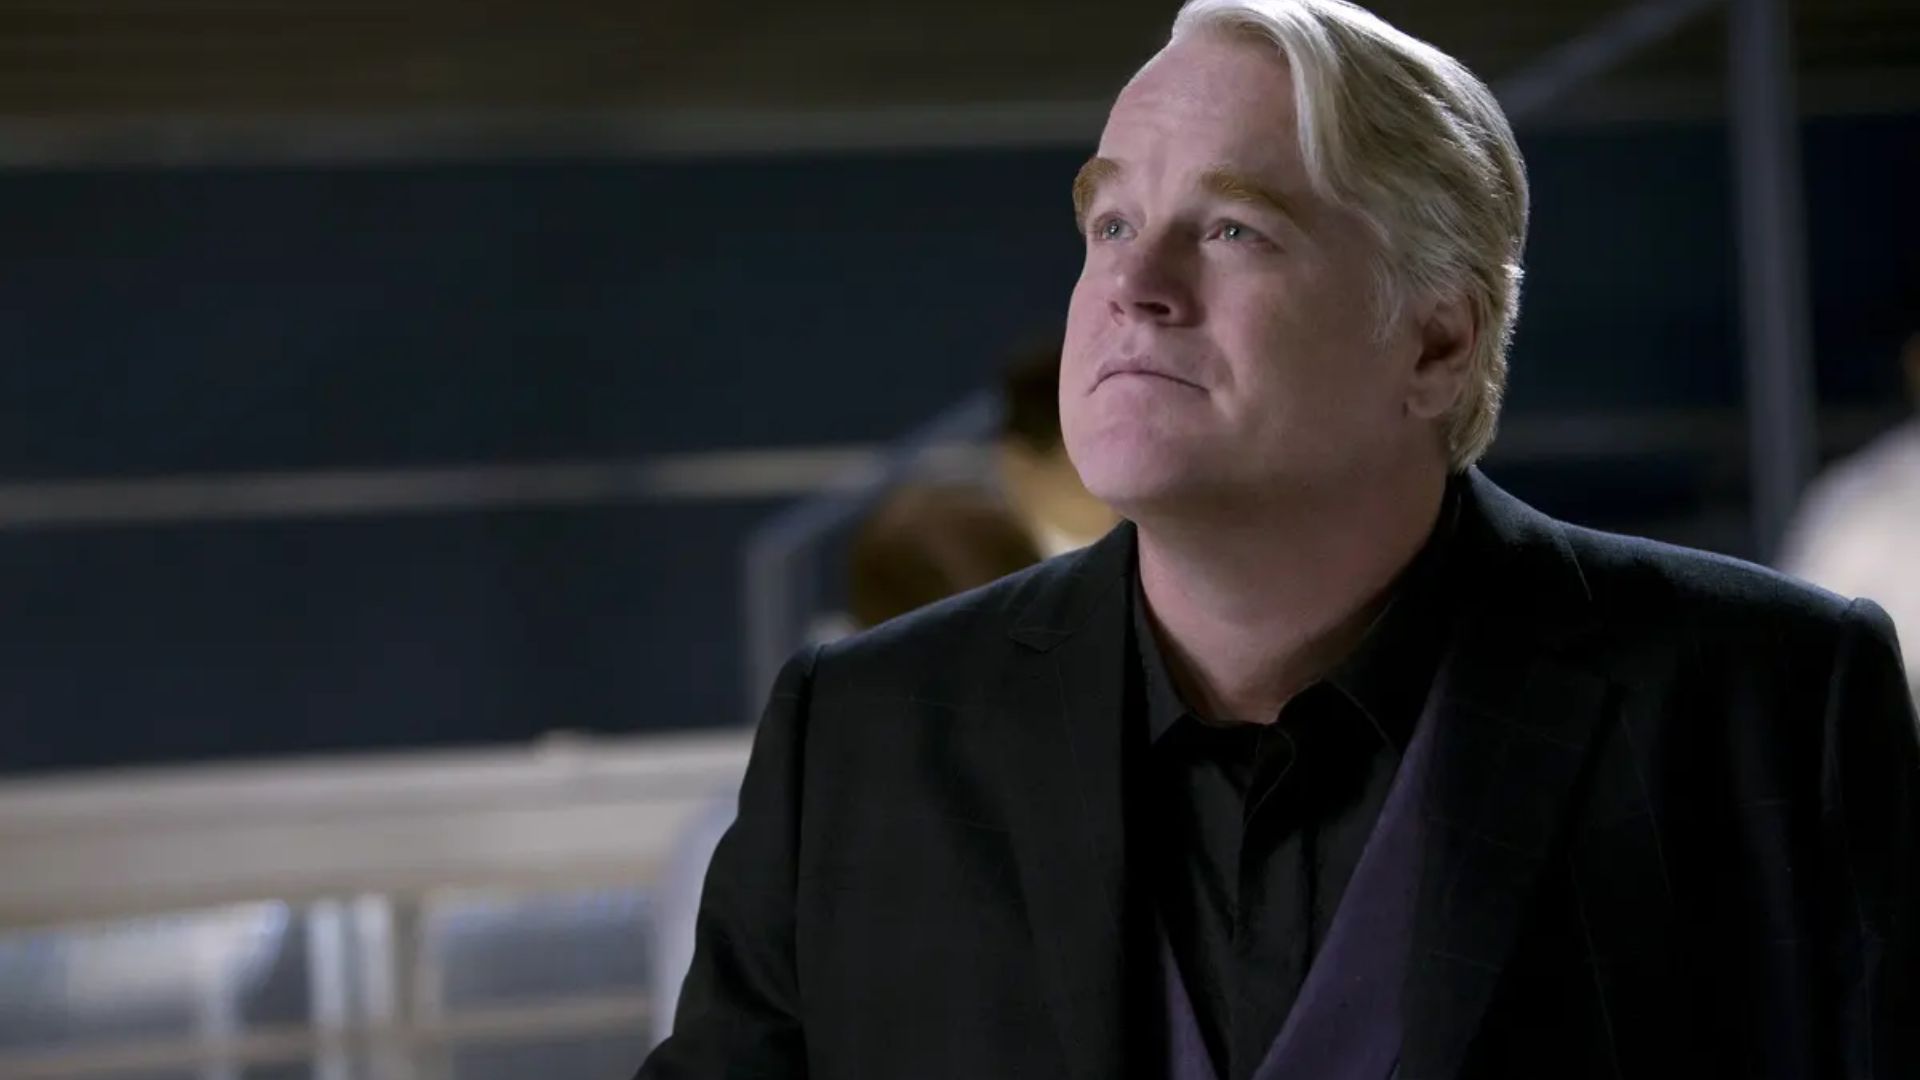 Philip Seymour Hoffman - An American Actor Known For His Supporting And Character Roles